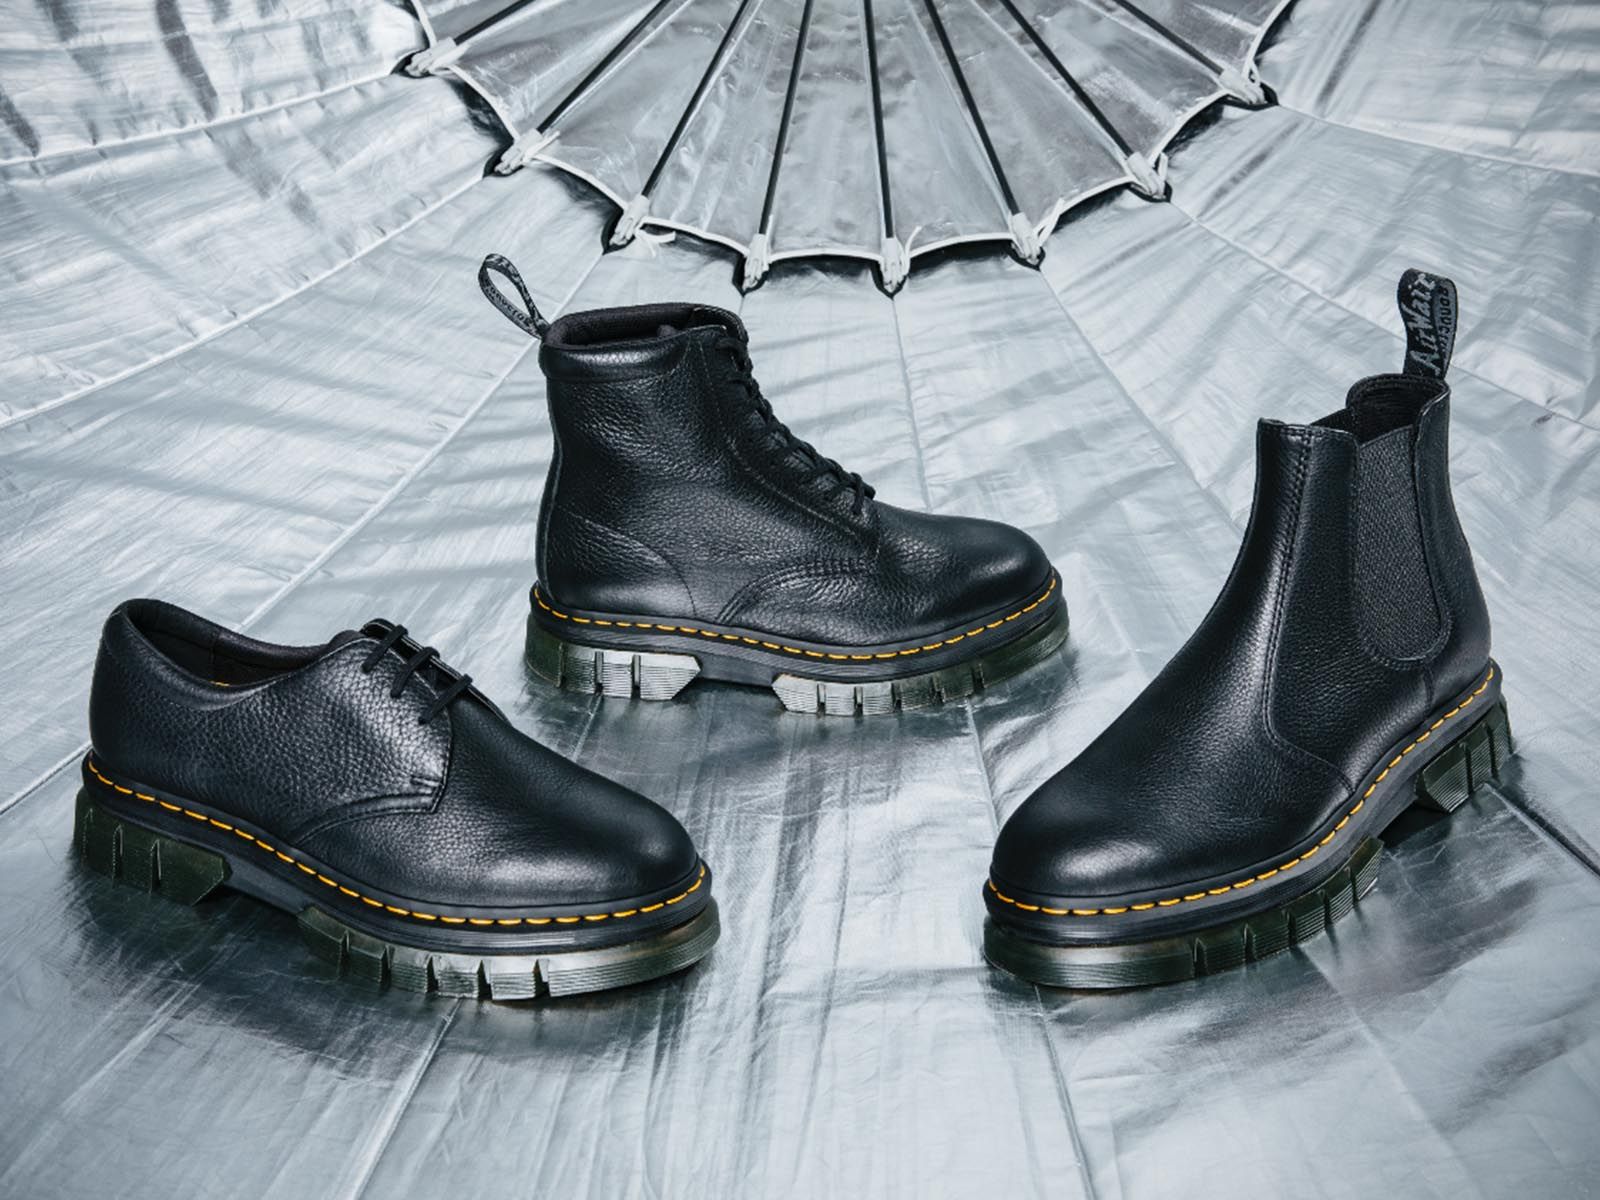 Dr. Martens launches Bex Neoteric Rikard with quad platform